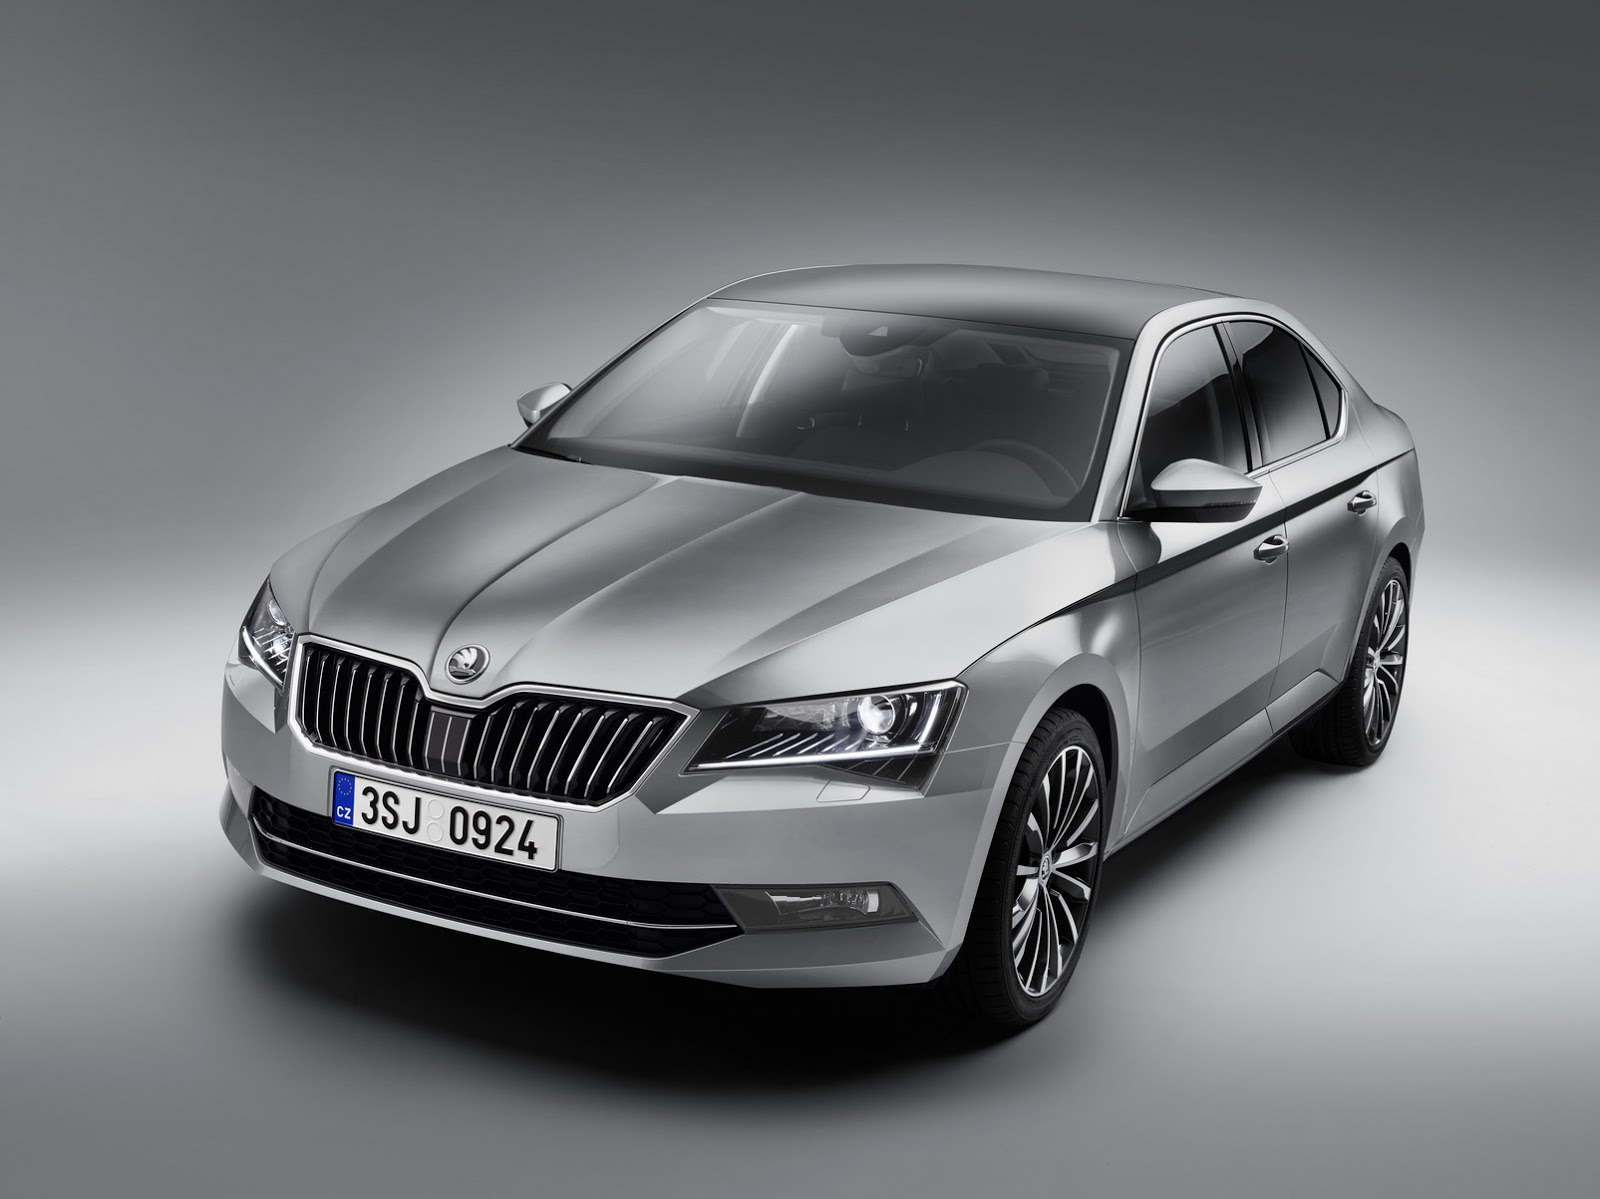 Skoda's New Superb Looks Poised To Win Over Both Hearts & Minds | Carscoops